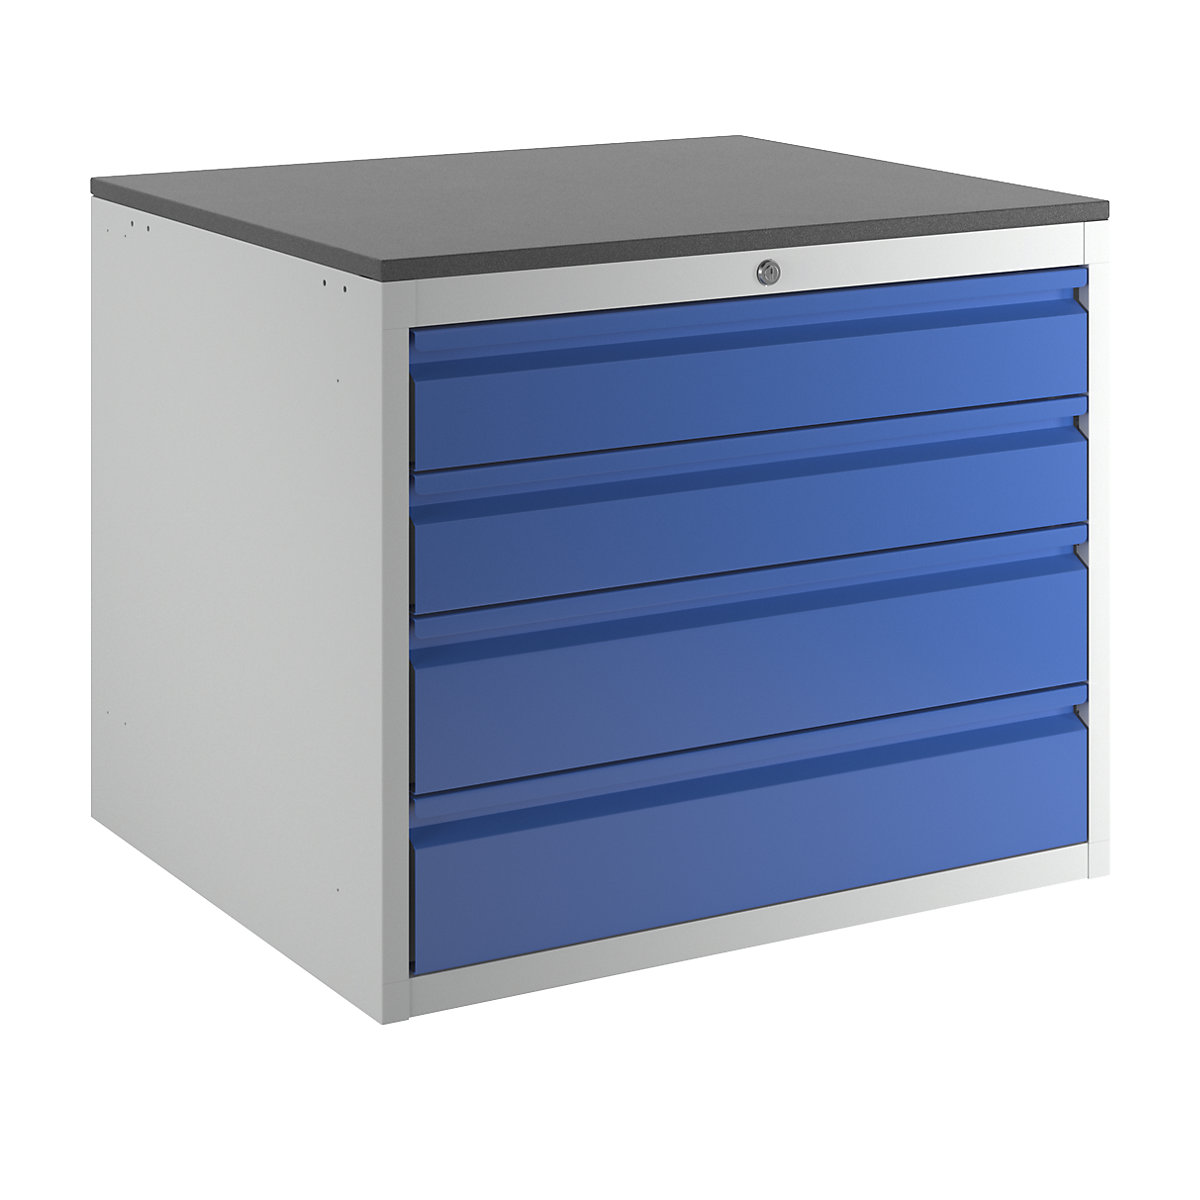 Drawer cupboard with telescopic guides – RAU, height 640 mm, drawers: 2 x 120, 2 x 150 mm, light grey / gentian blue, width 770 mm-5